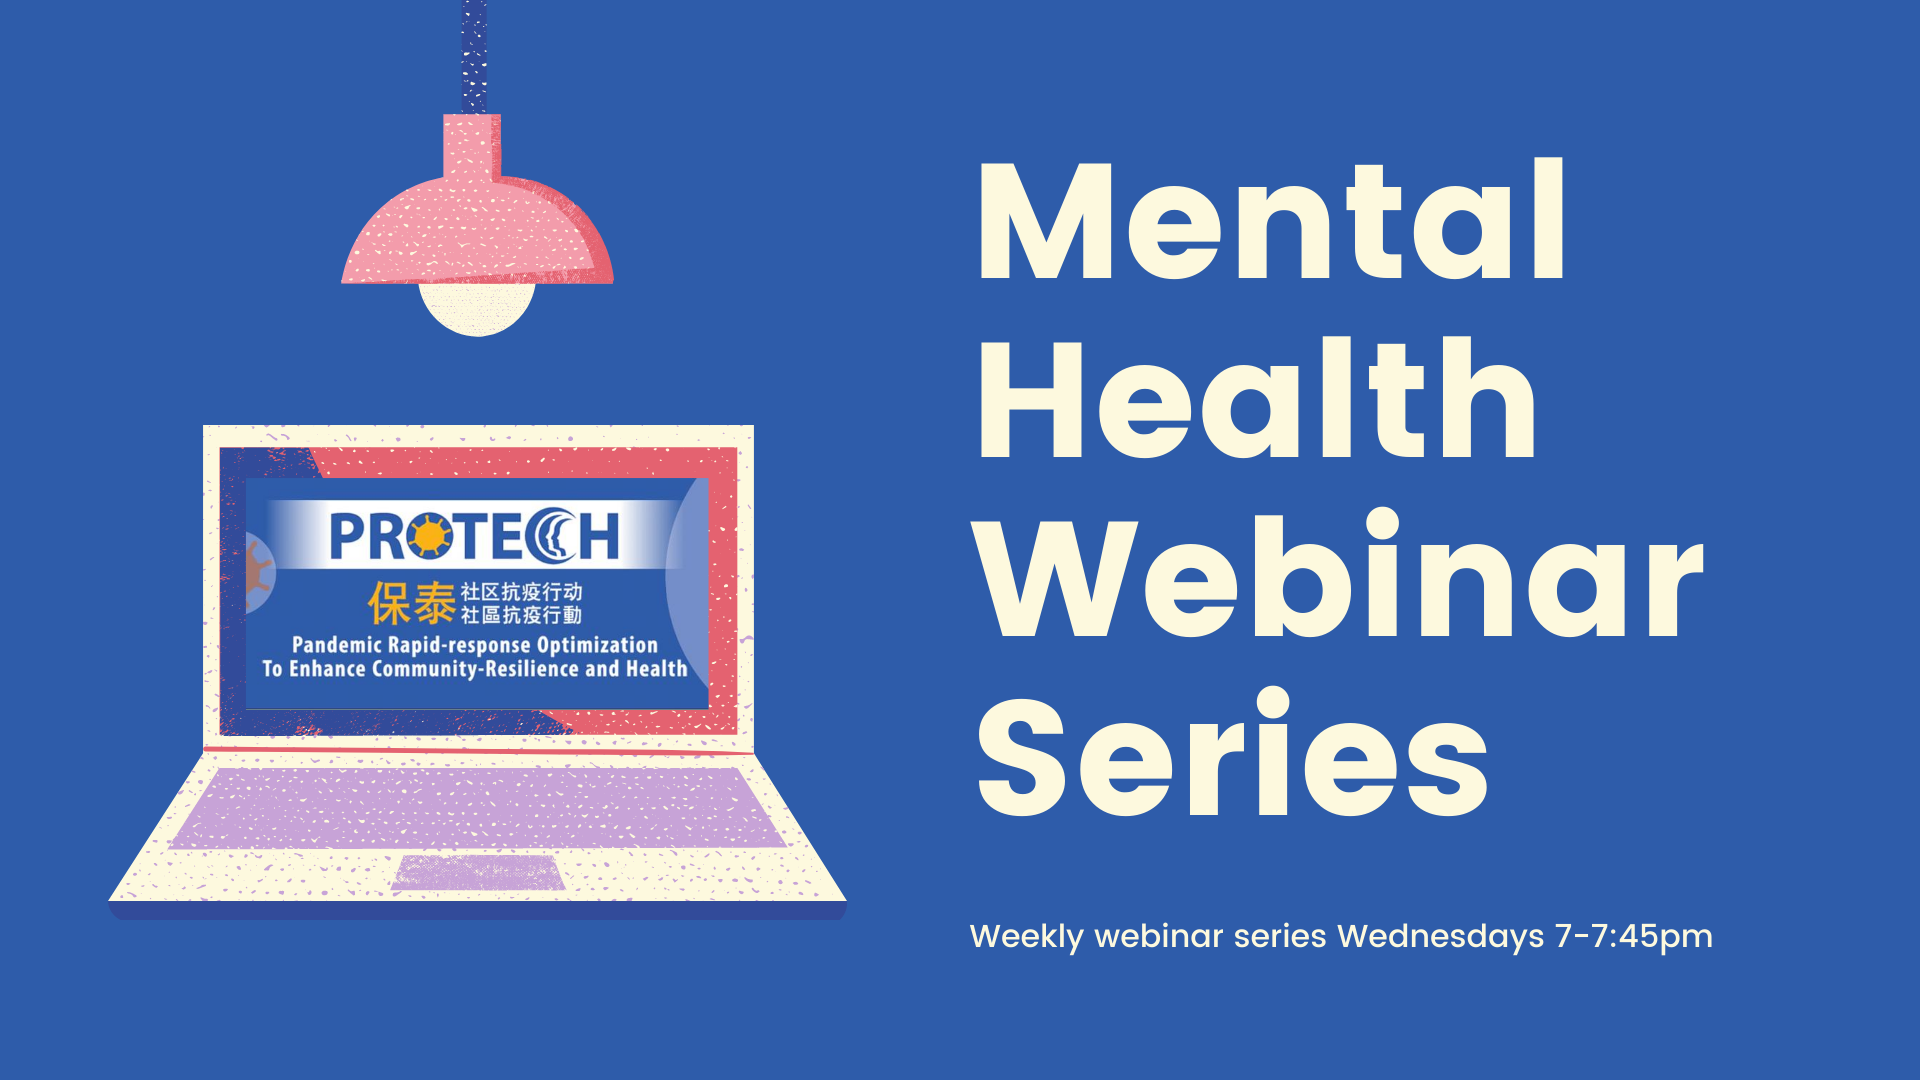 Mental Health Webinar Launched! Project PROTECH